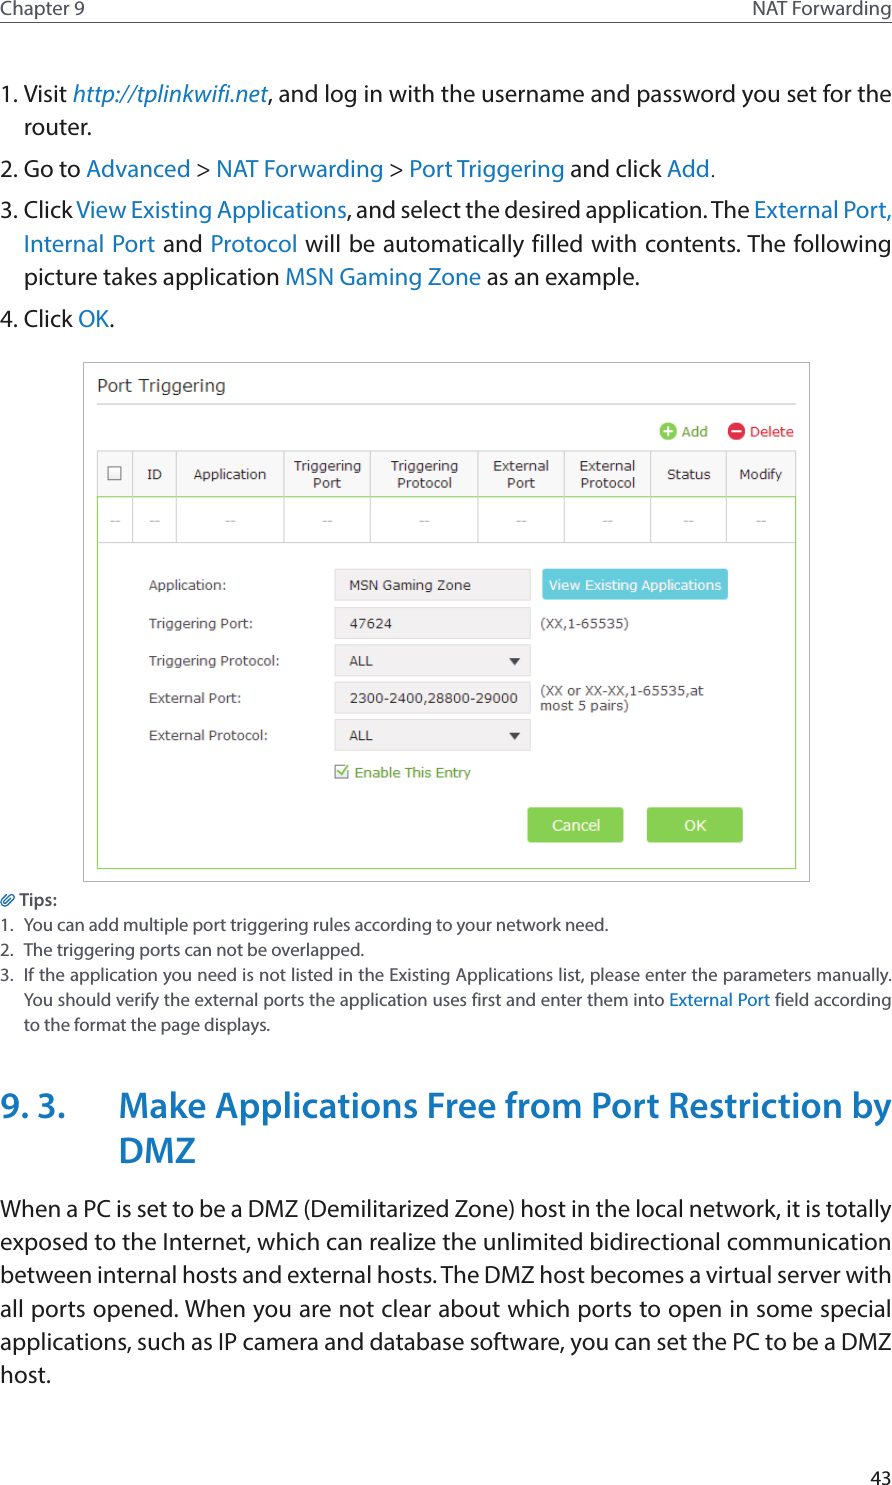 43Chapter 9 NAT Forwarding1. Visit http://tplinkwifi.net, and log in with the username and password you set for the router.2. Go to Advanced &gt; NAT Forwarding &gt; Port Triggering and click Add.3. Click View Existing Applications, and select the desired application. The External Port, Internal Port and Protocol will be automatically filled with contents. The following picture takes application MSN Gaming Zone as an example.4. Click OK.Tips:1.  You can add multiple port triggering rules according to your network need.2.  The triggering ports can not be overlapped.3.  If the application you need is not listed in the Existing Applications list, please enter the parameters manually. You should verify the external ports the application uses first and enter them into External Port field according to the format the page displays.9. 3.  Make Applications Free from Port Restriction by DMZWhen a PC is set to be a DMZ (Demilitarized Zone) host in the local network, it is totally exposed to the Internet, which can realize the unlimited bidirectional communication between internal hosts and external hosts. The DMZ host becomes a virtual server with all ports opened. When you are not clear about which ports to open in some special applications, such as IP camera and database software, you can set the PC to be a DMZ host.